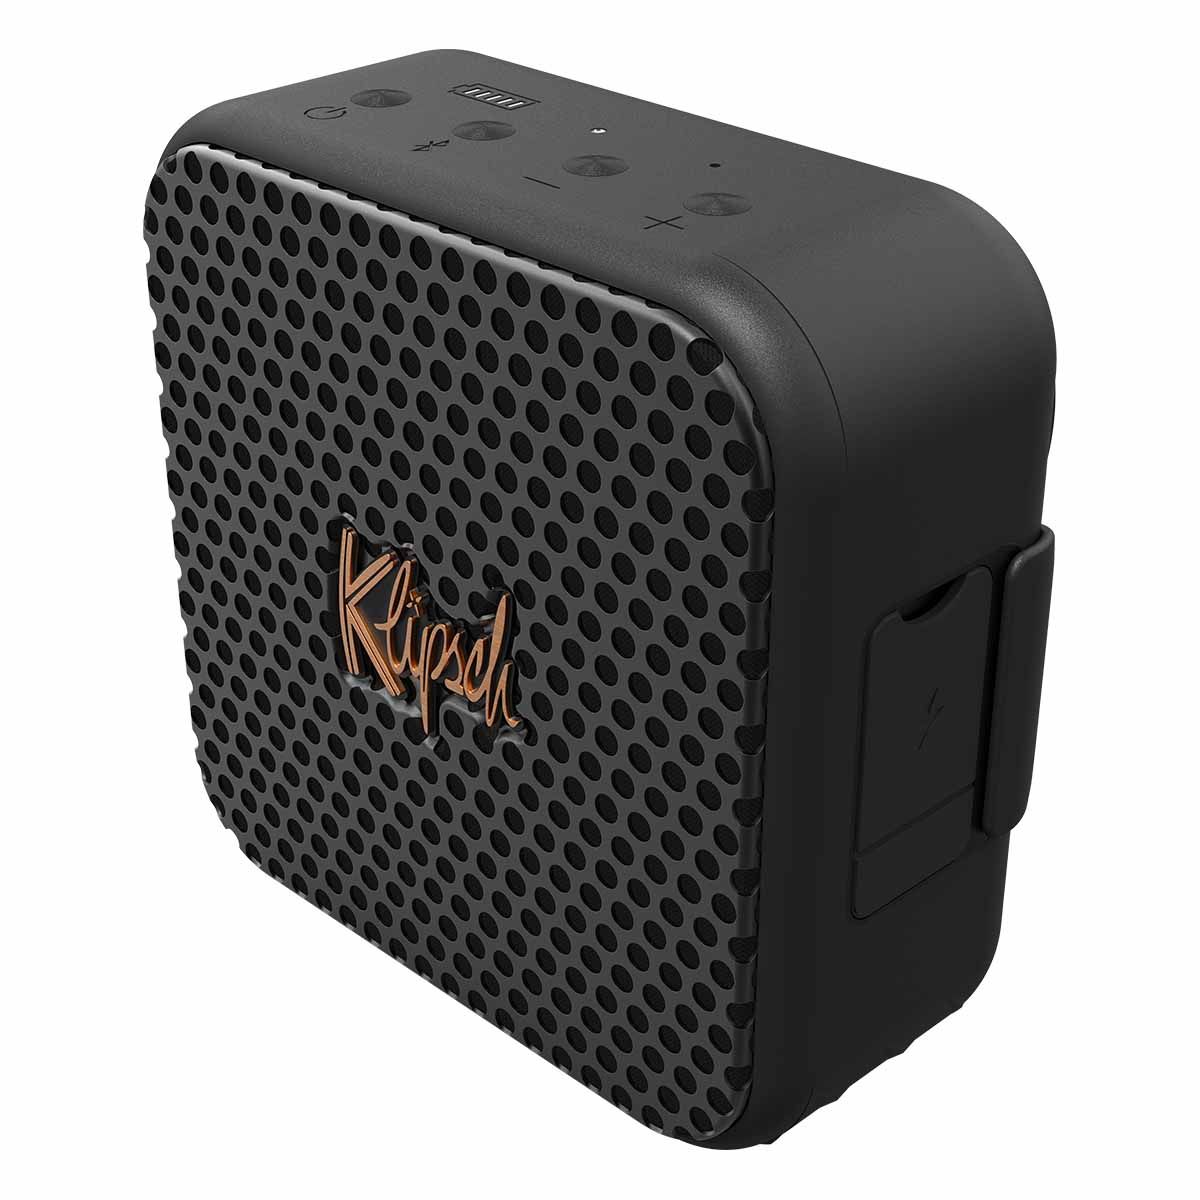 Klispch Austin Ultra Portable Bluetooth Speaker angled right front view